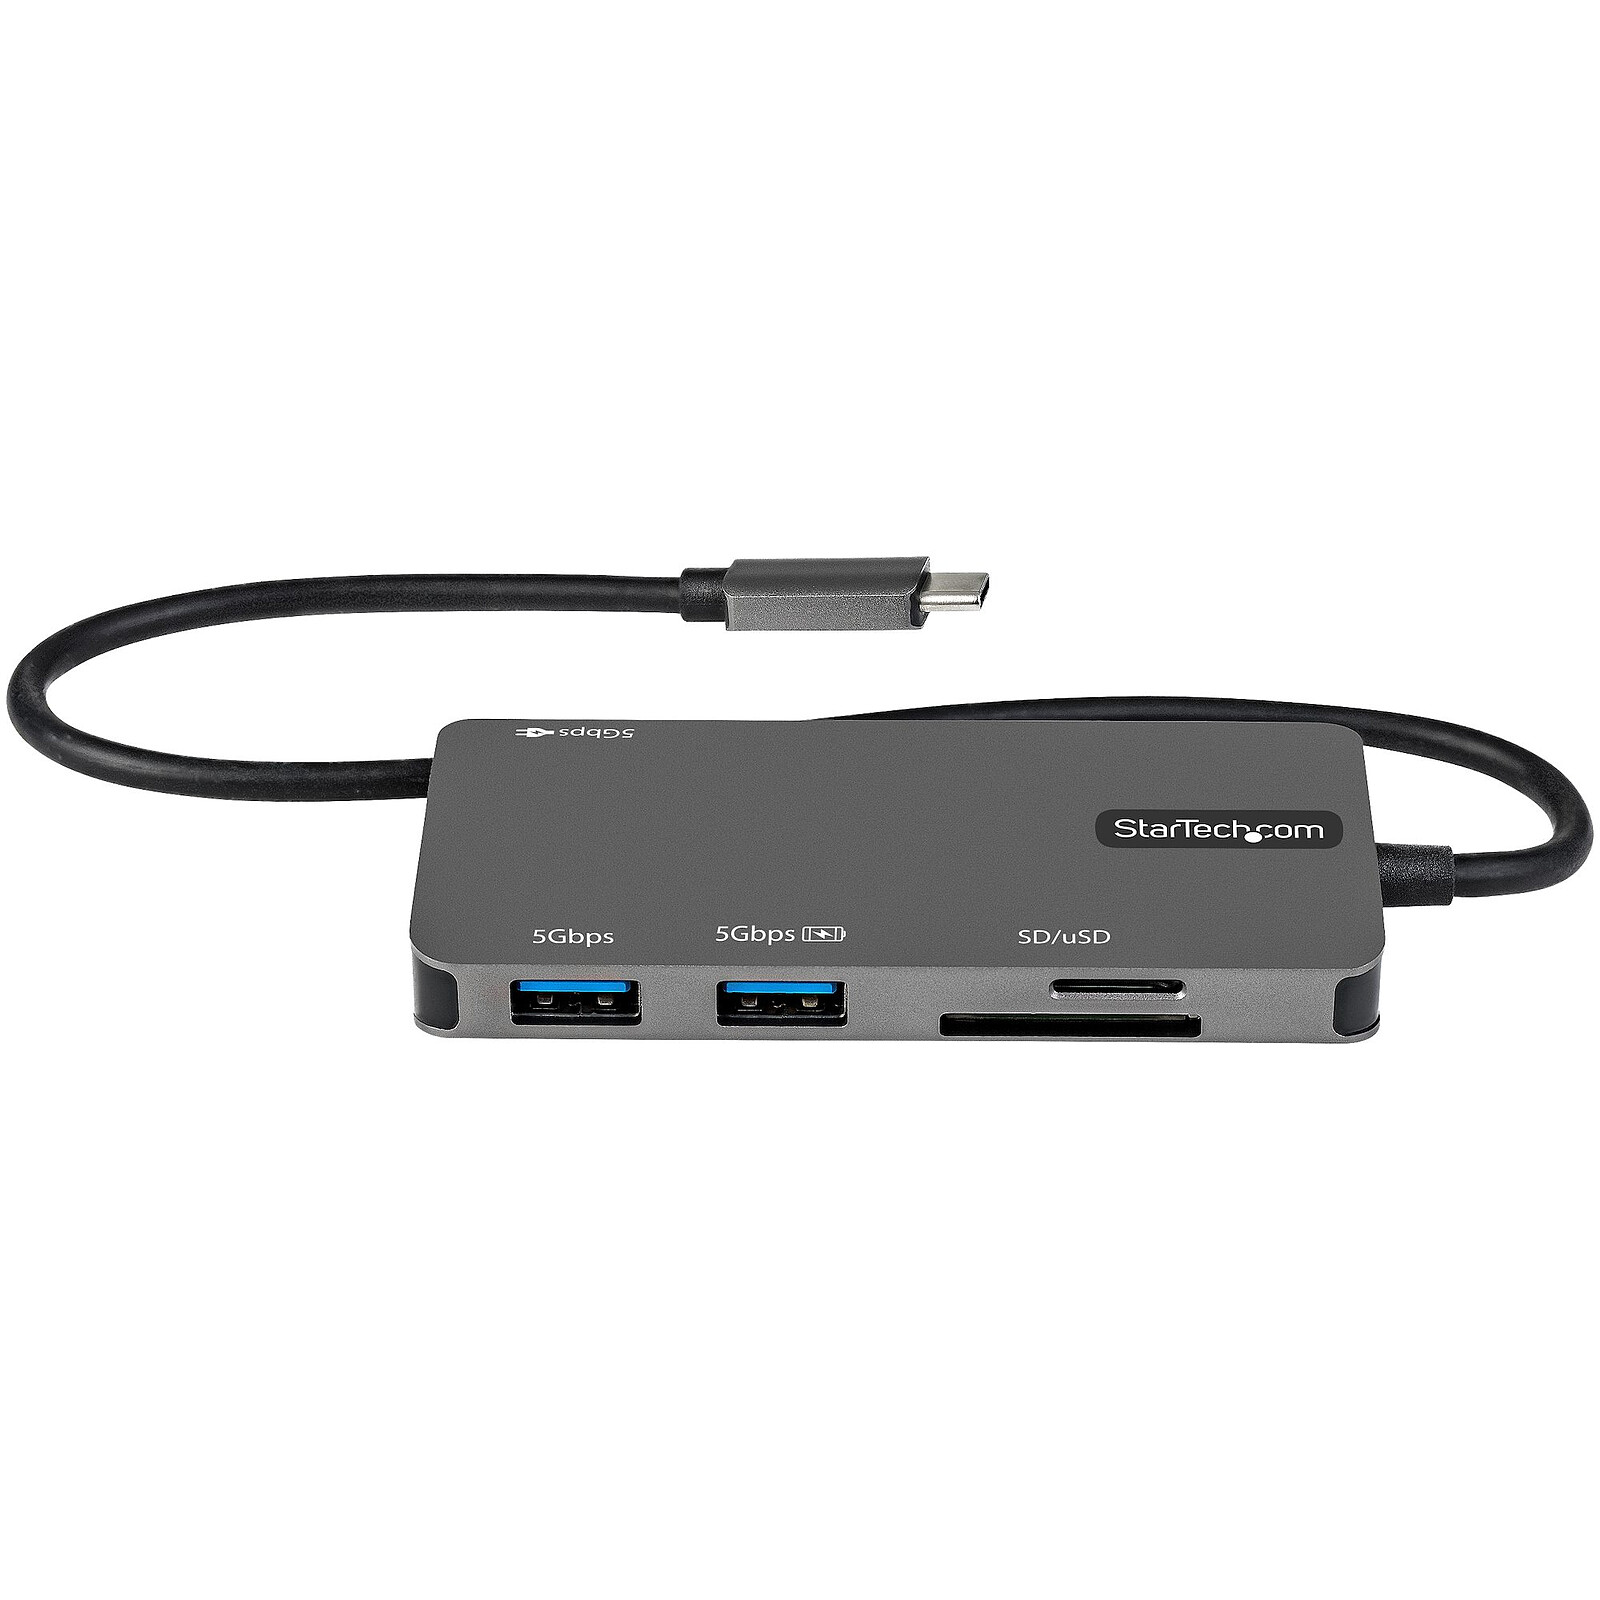 USB-C Multimedia Hub Adapter 8 Ports with Power Delivery 3.0